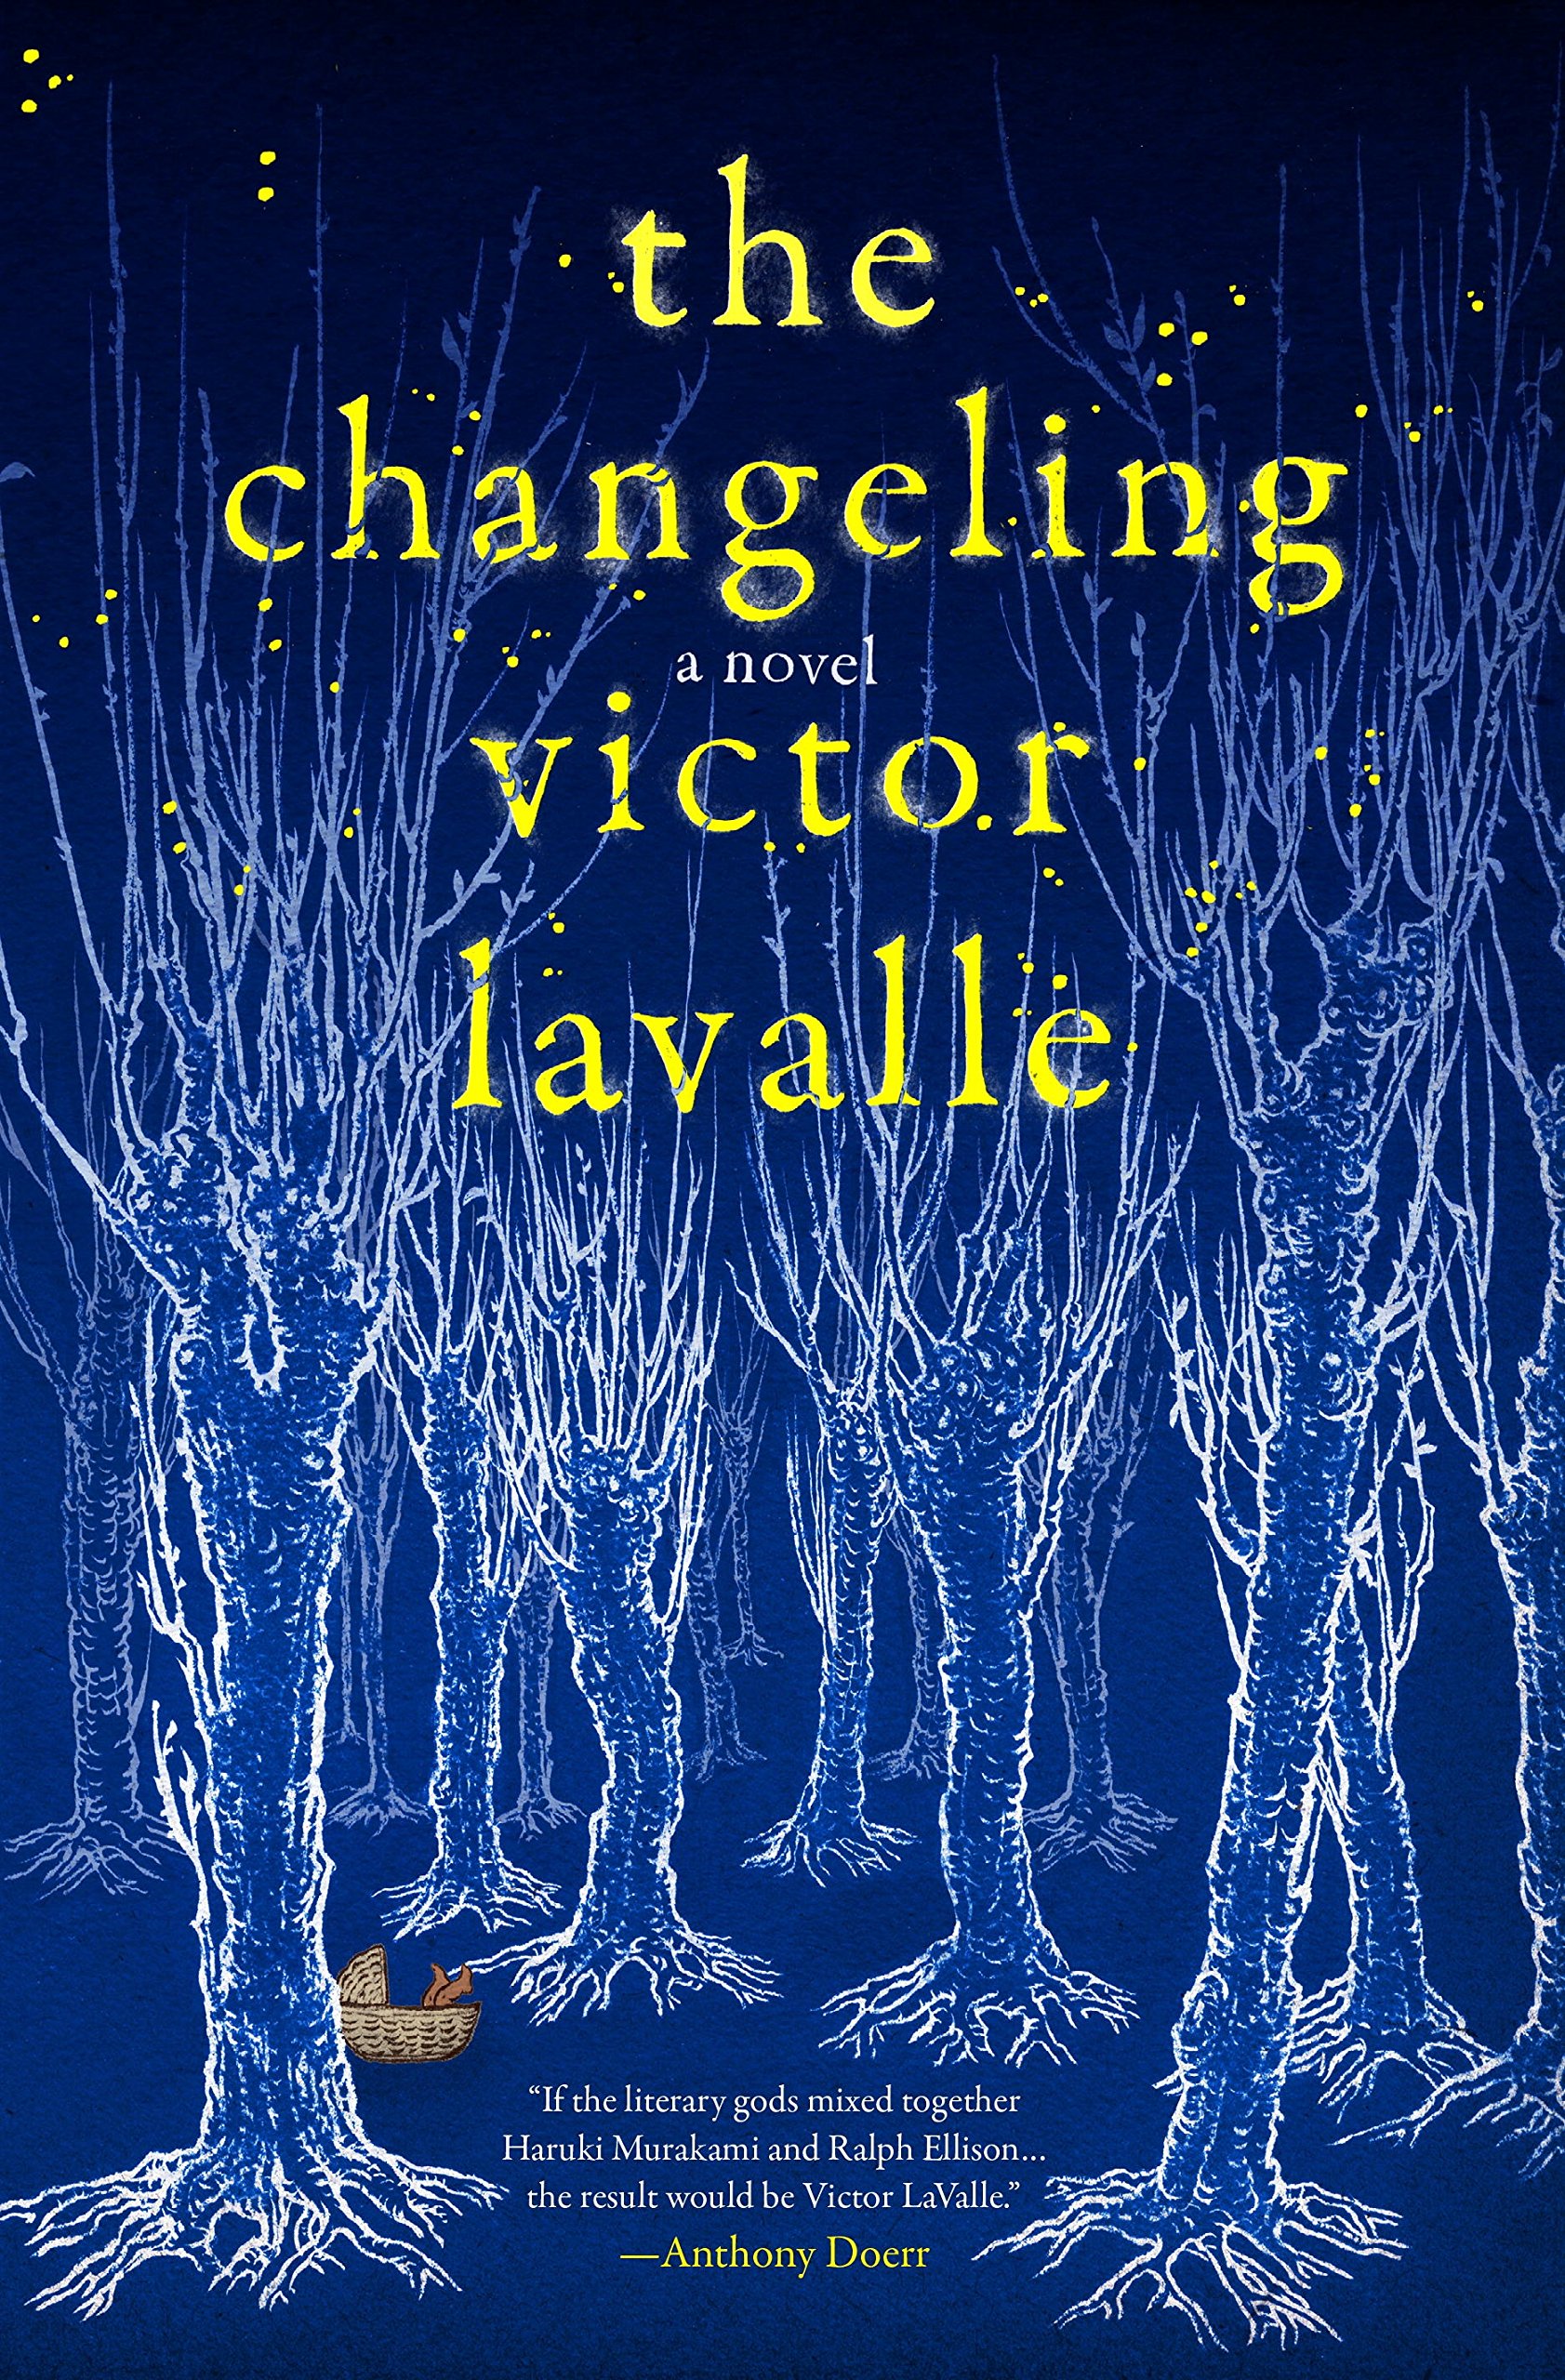 the changeling victor lavalle review